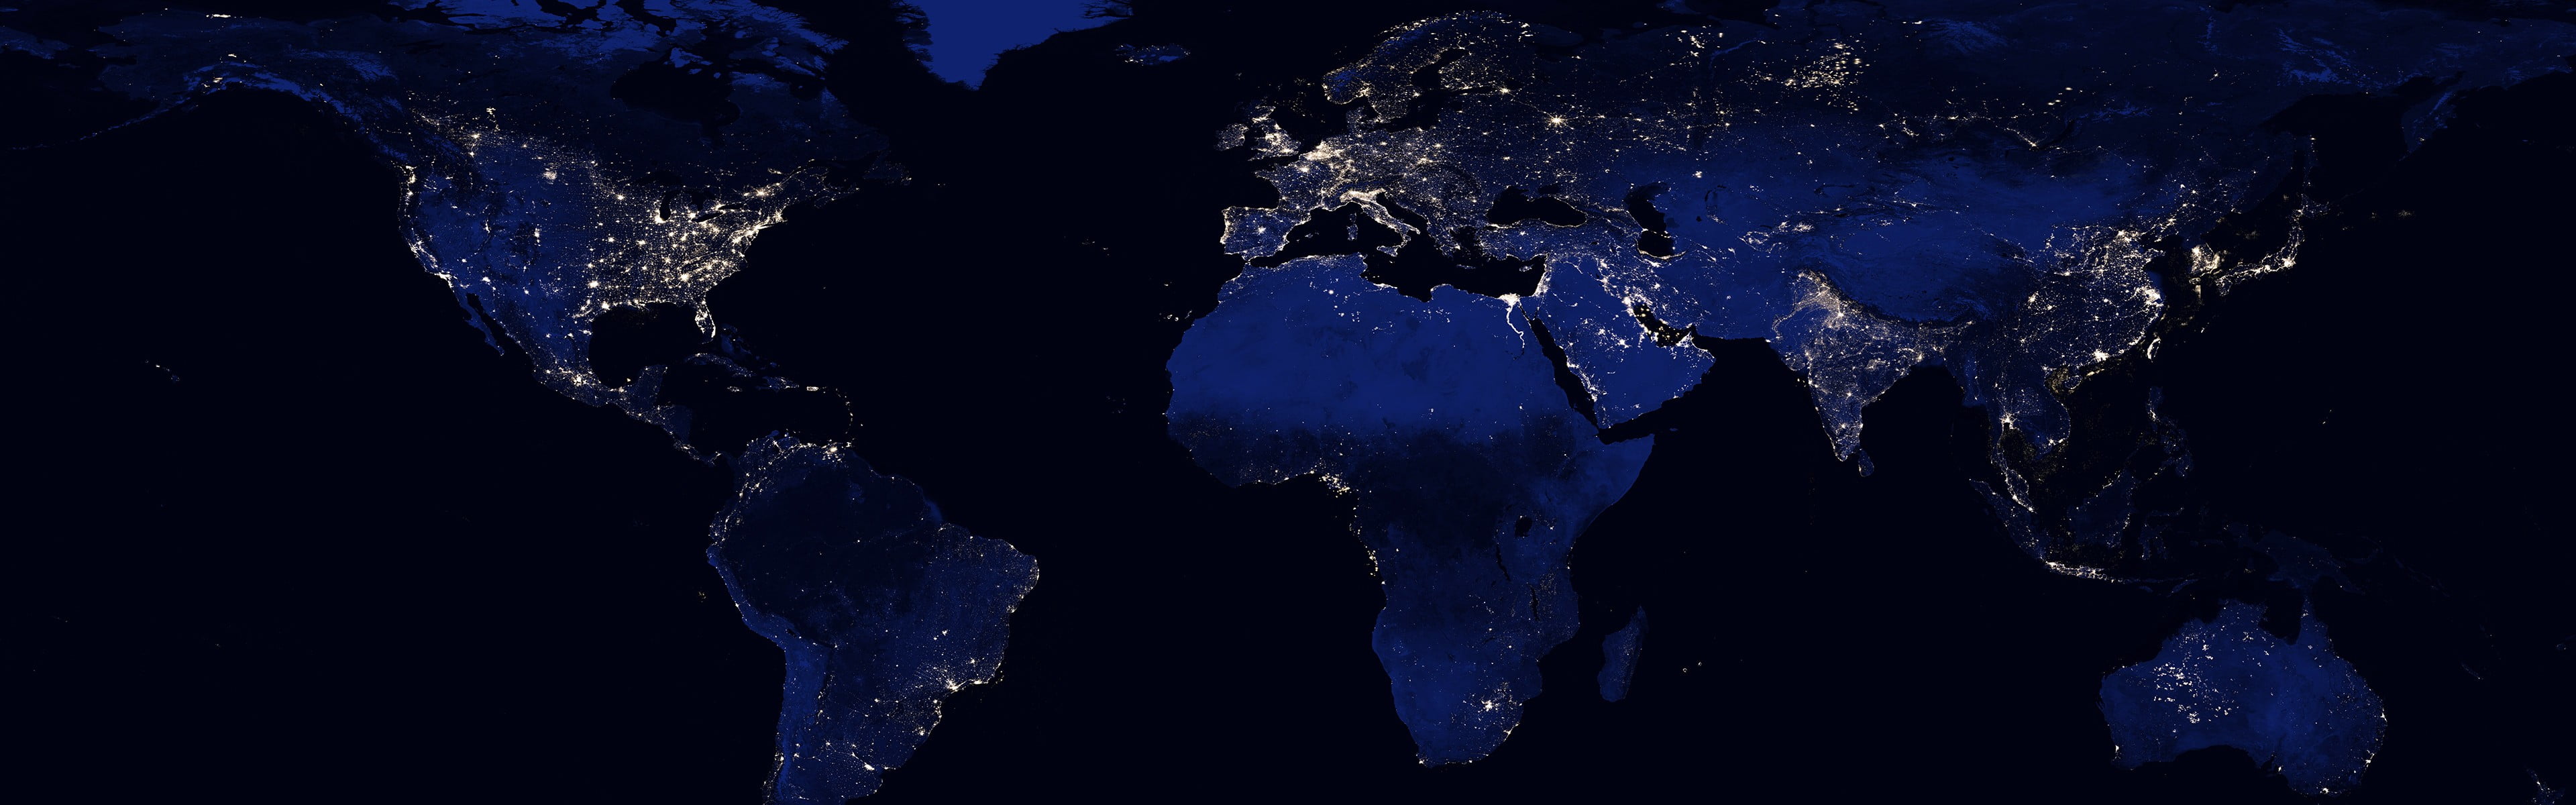 world map digital wallpaper, Earth, night, space, continents